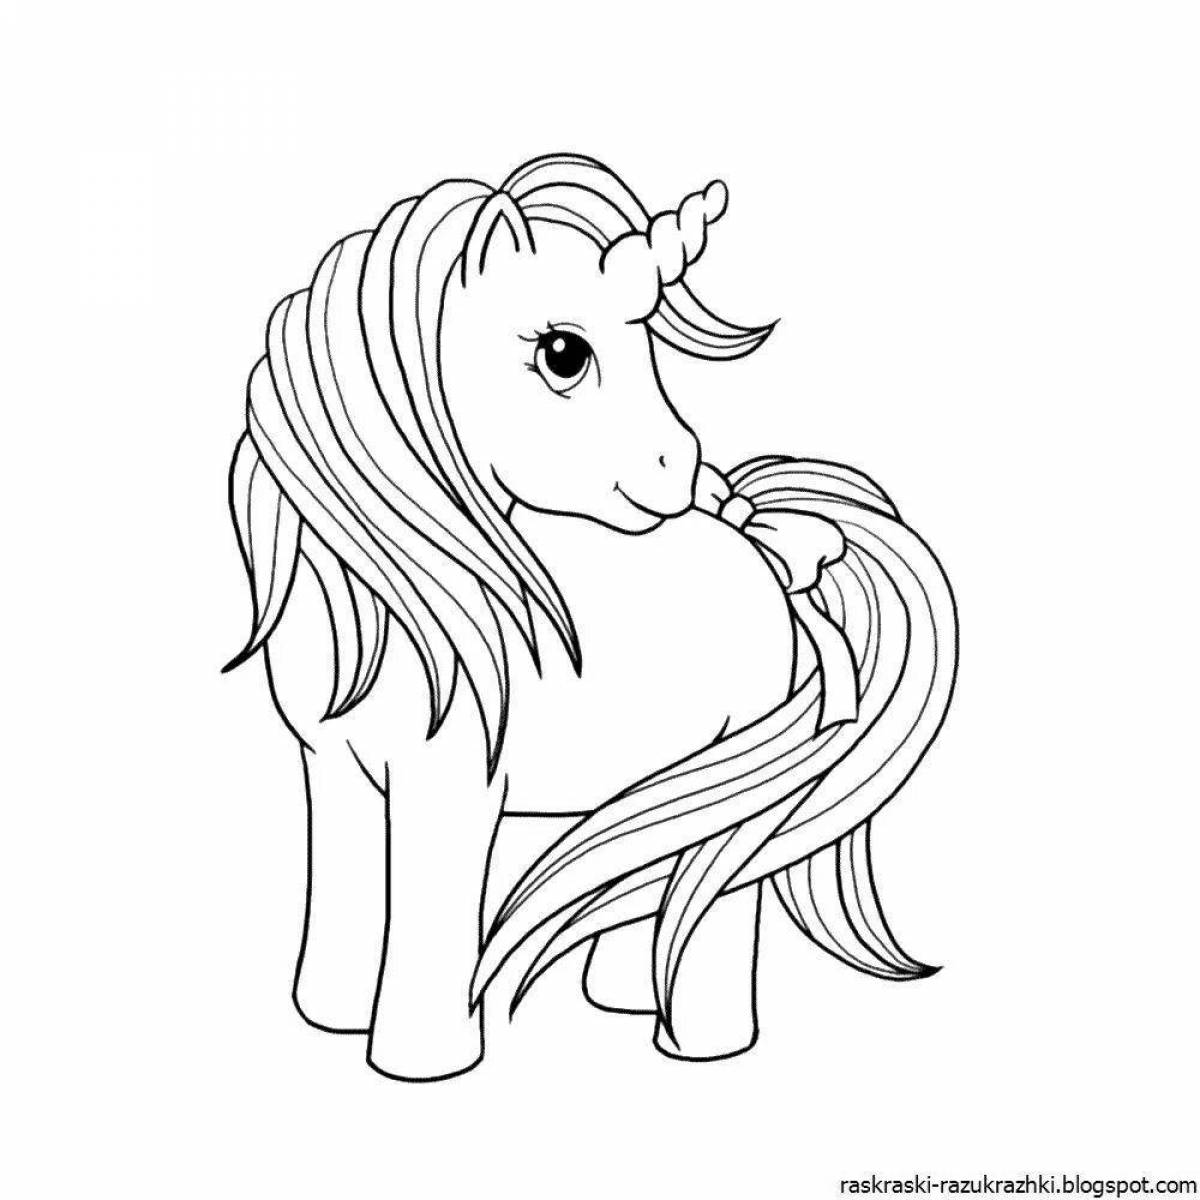 Lovely coloring book for girls cute unicorn